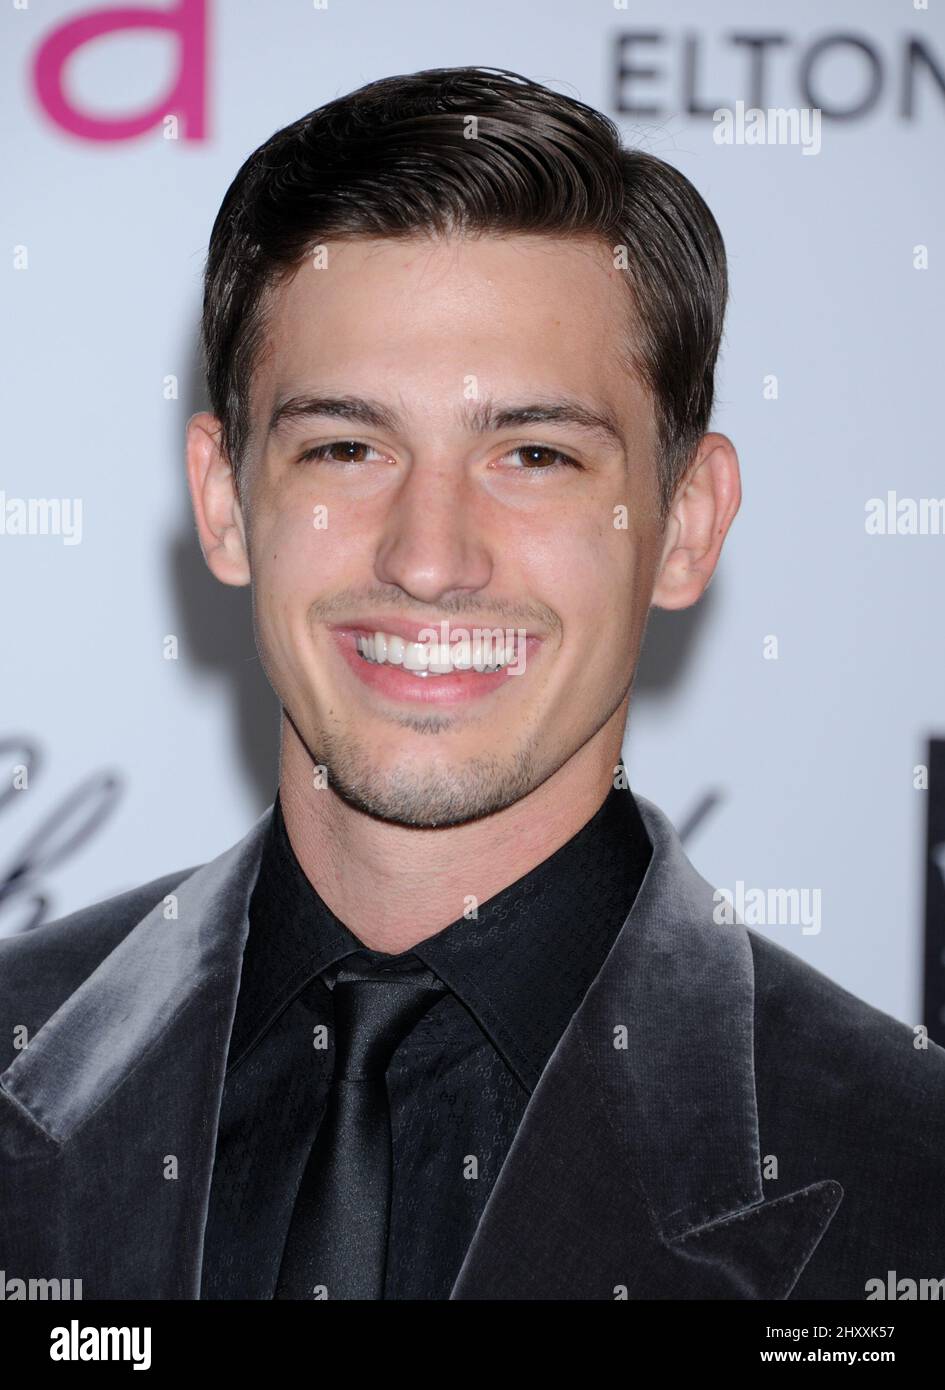 Asher Book at the Elton John AIDS Foundation Academy Awards Viewing party a West Hollywood Park, California Foto Stock